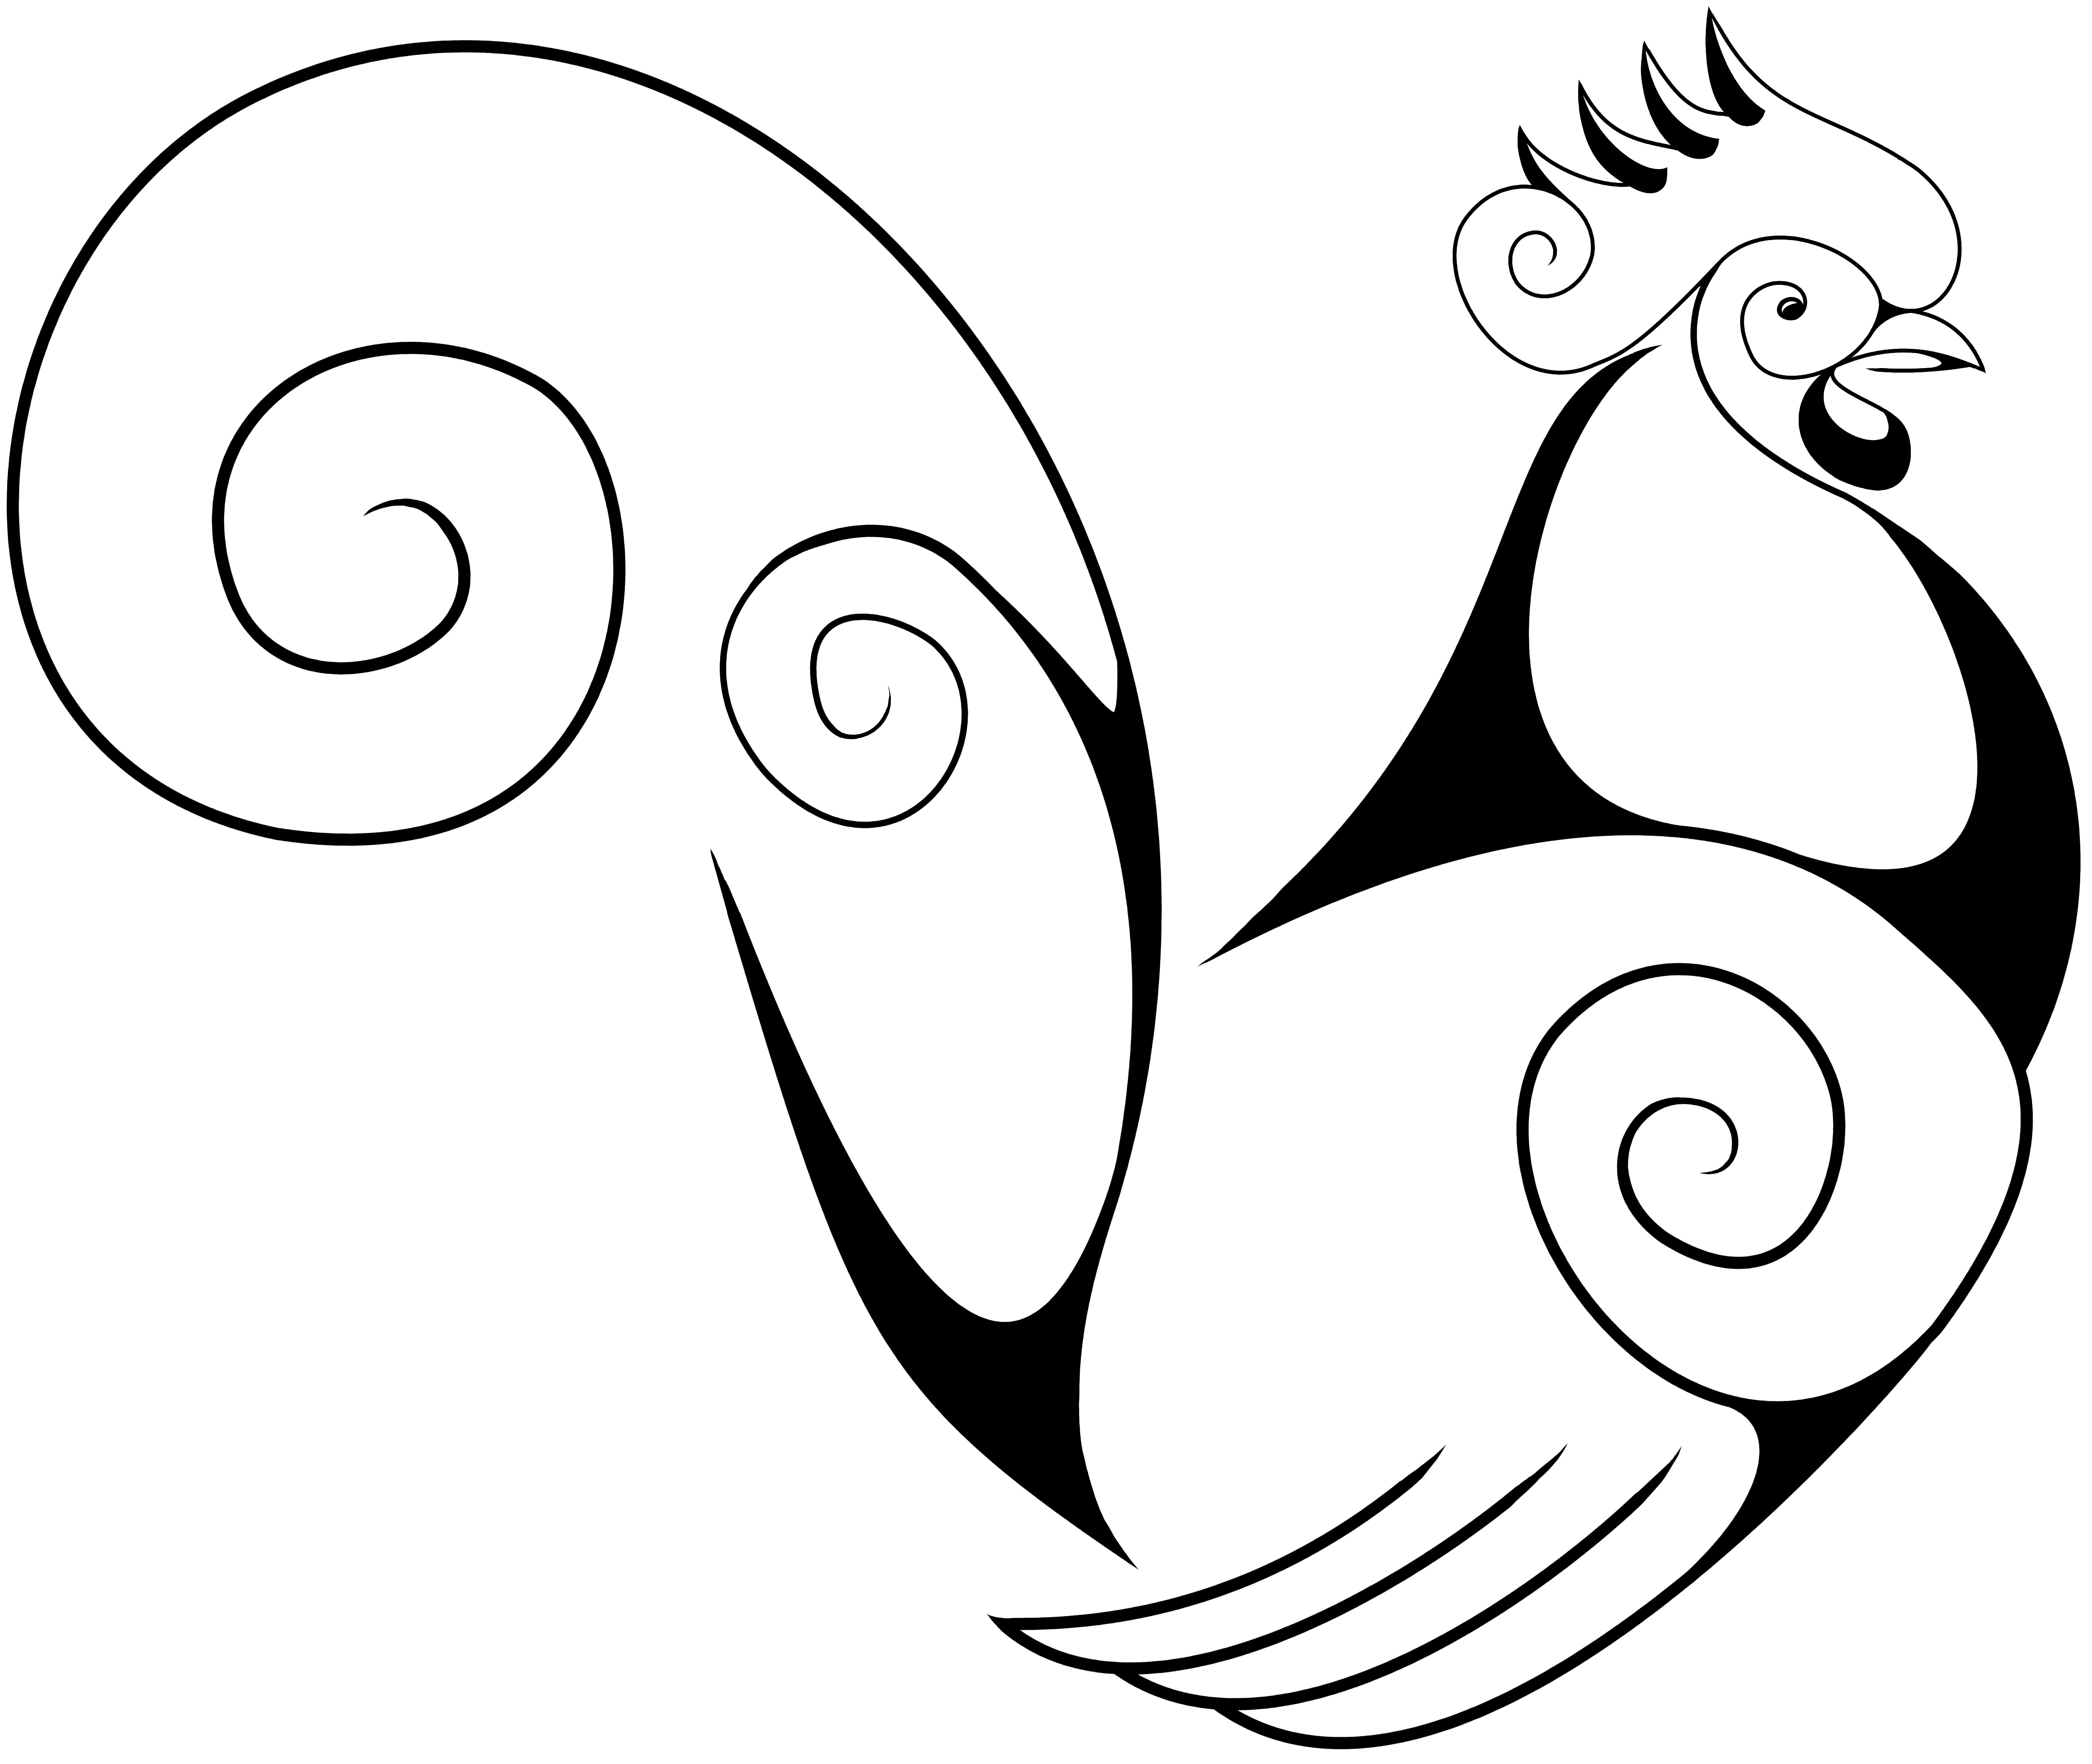 rooster clipart black and white - photo #44